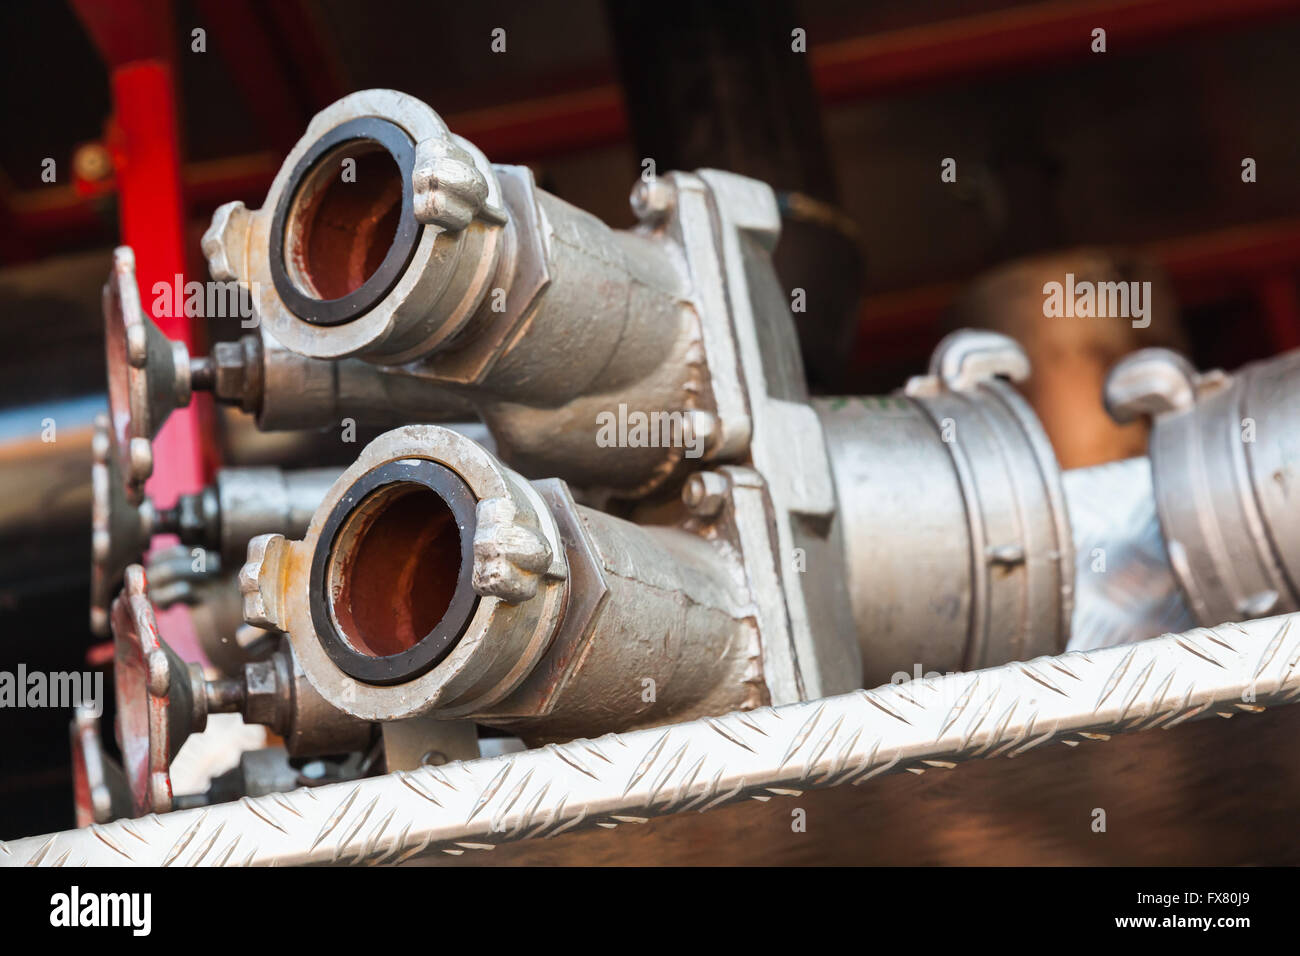 Firefighting equipment on red fire truck. Water hydrants close-up photo with selective focus Stock Photo